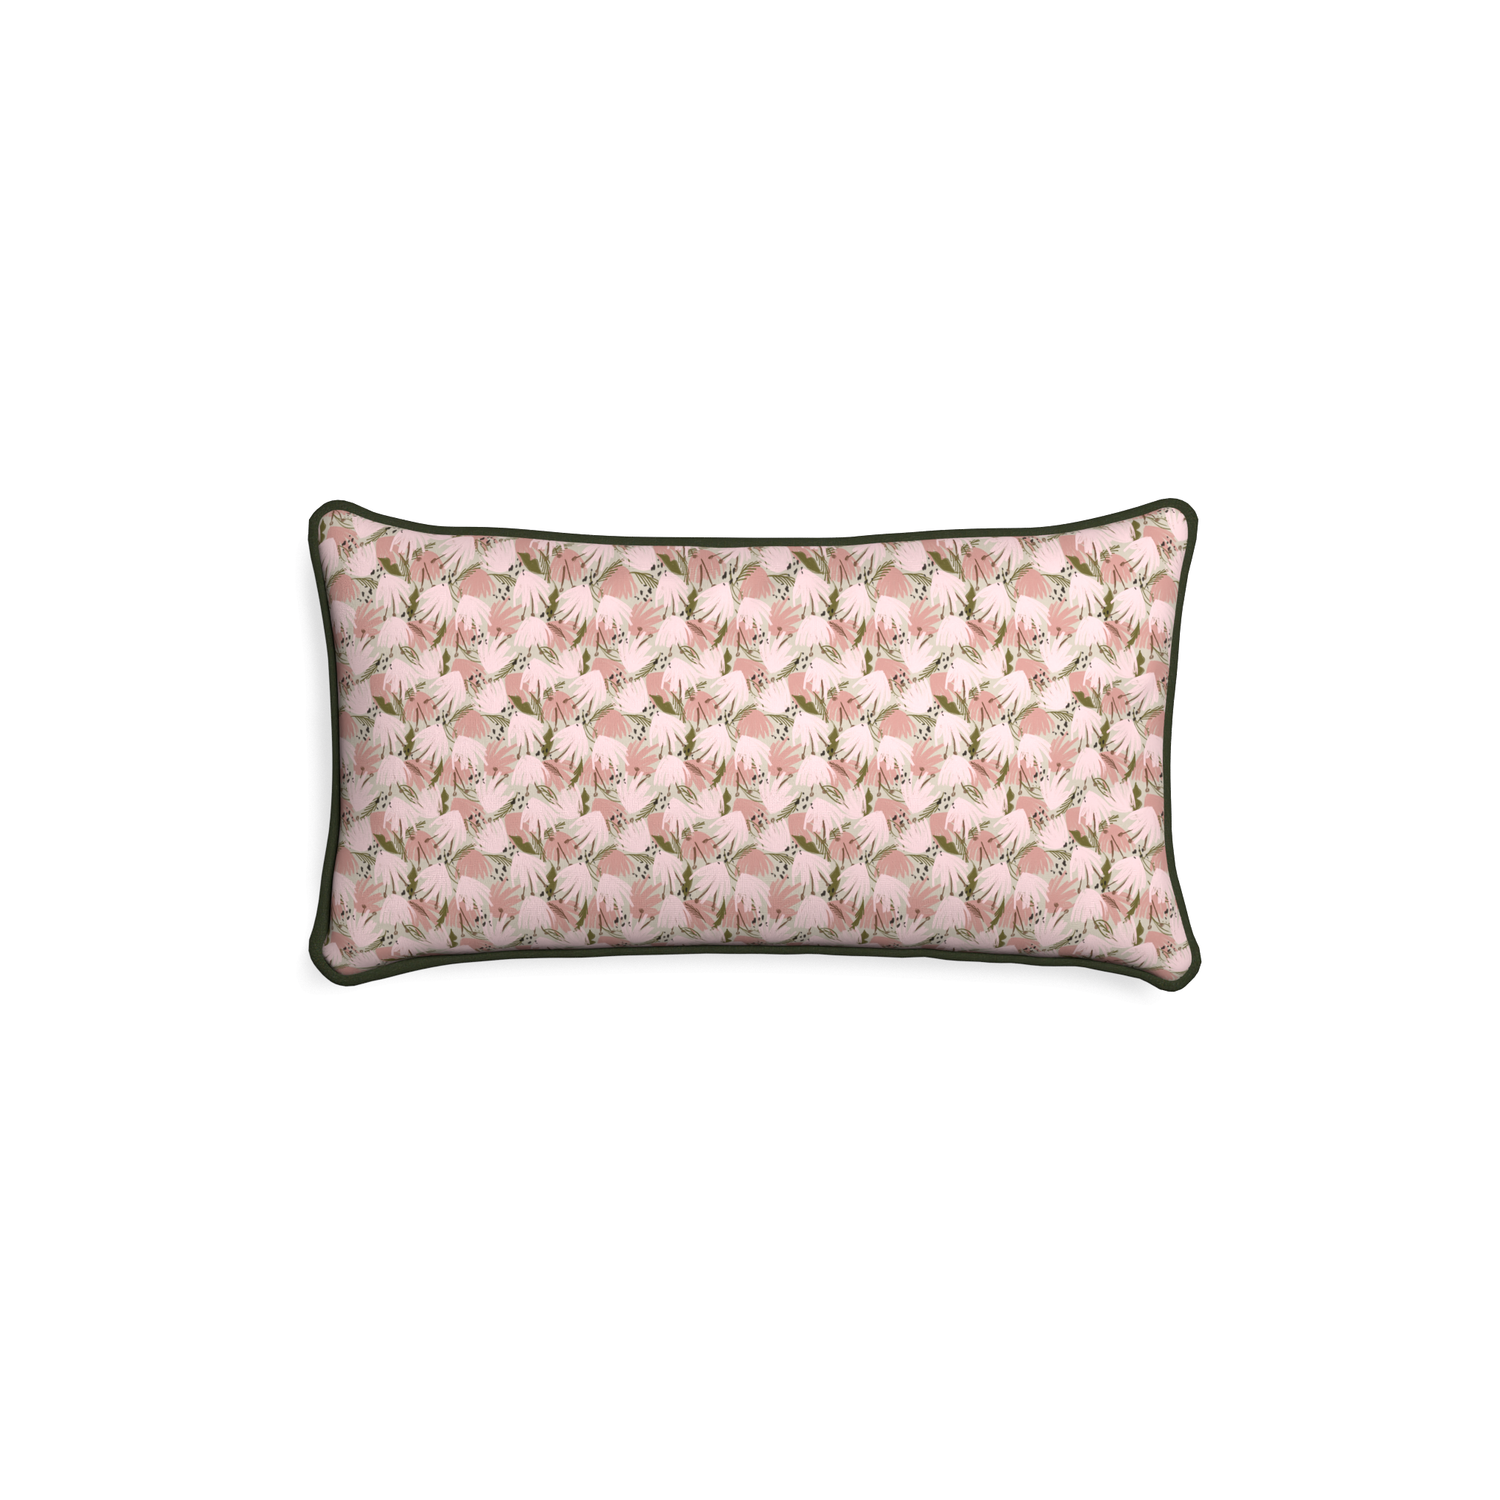 Petite-lumbar eden pink custom pink floralpillow with f piping on white background